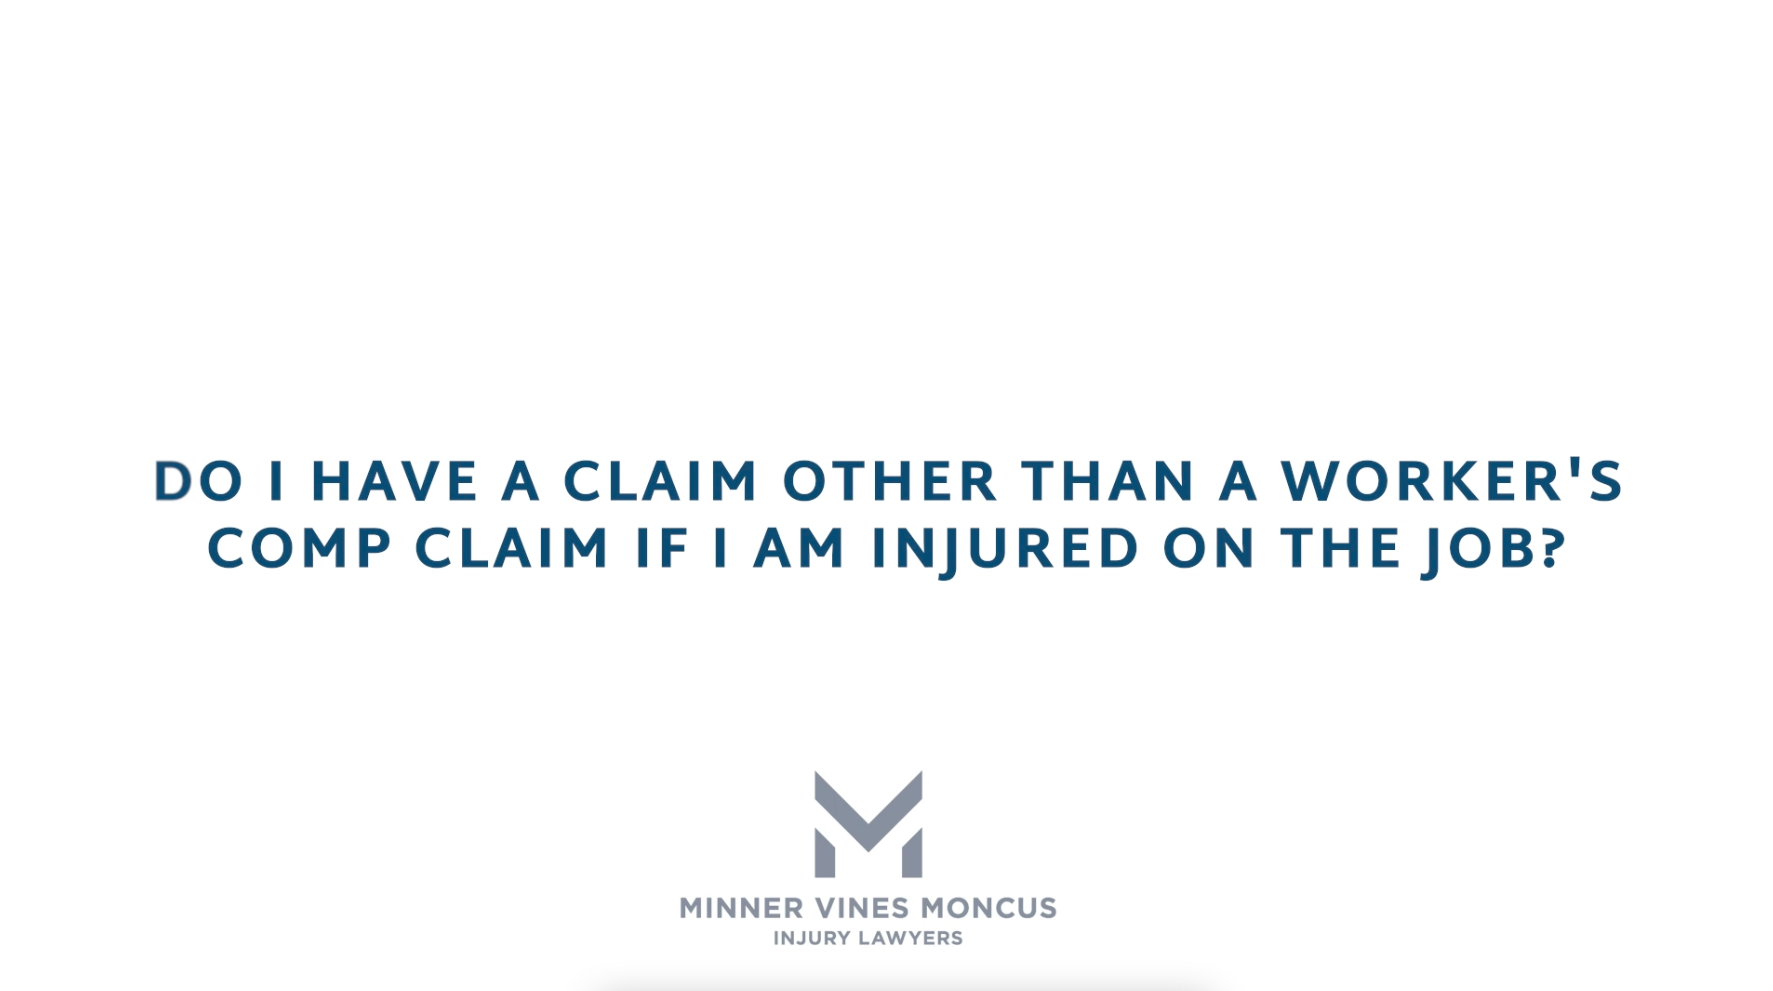 Do I have a claim other than a worker’s comp claim if I am injured on the job?